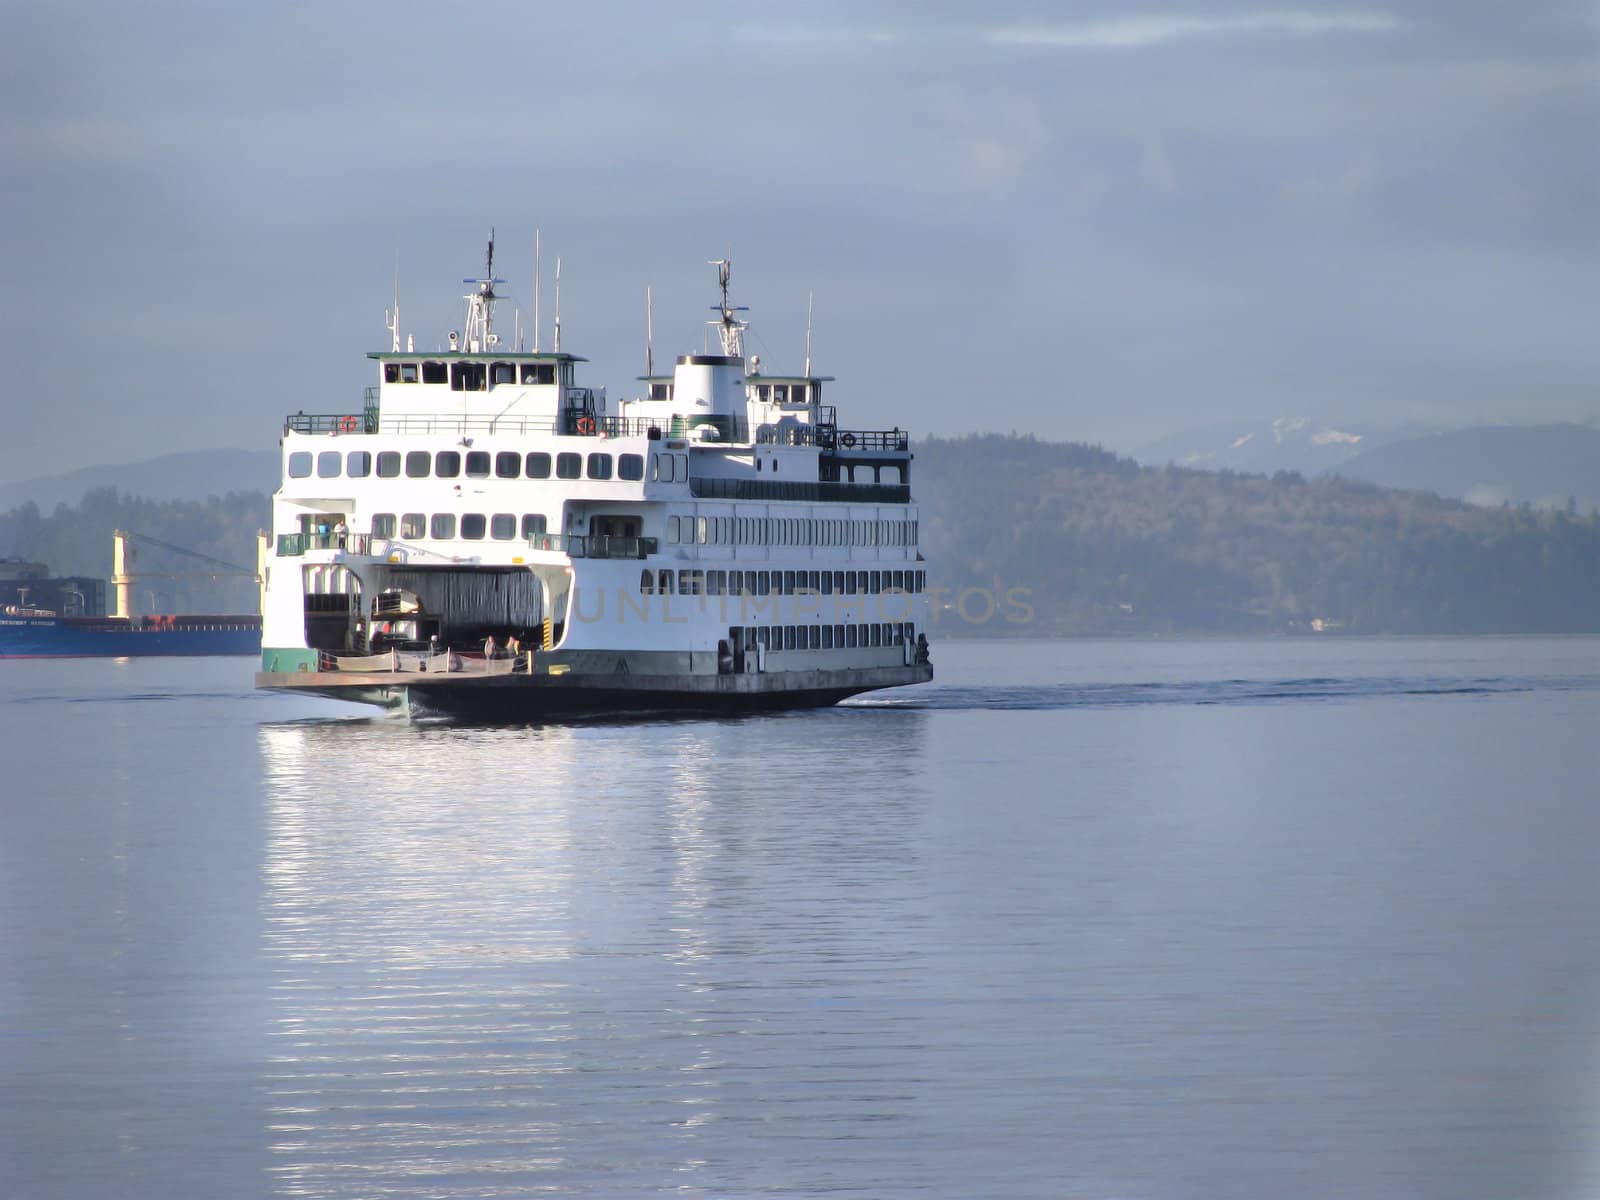 Washington State Ferry on the Puget Sound with the Olympic Mountains on the horizon.